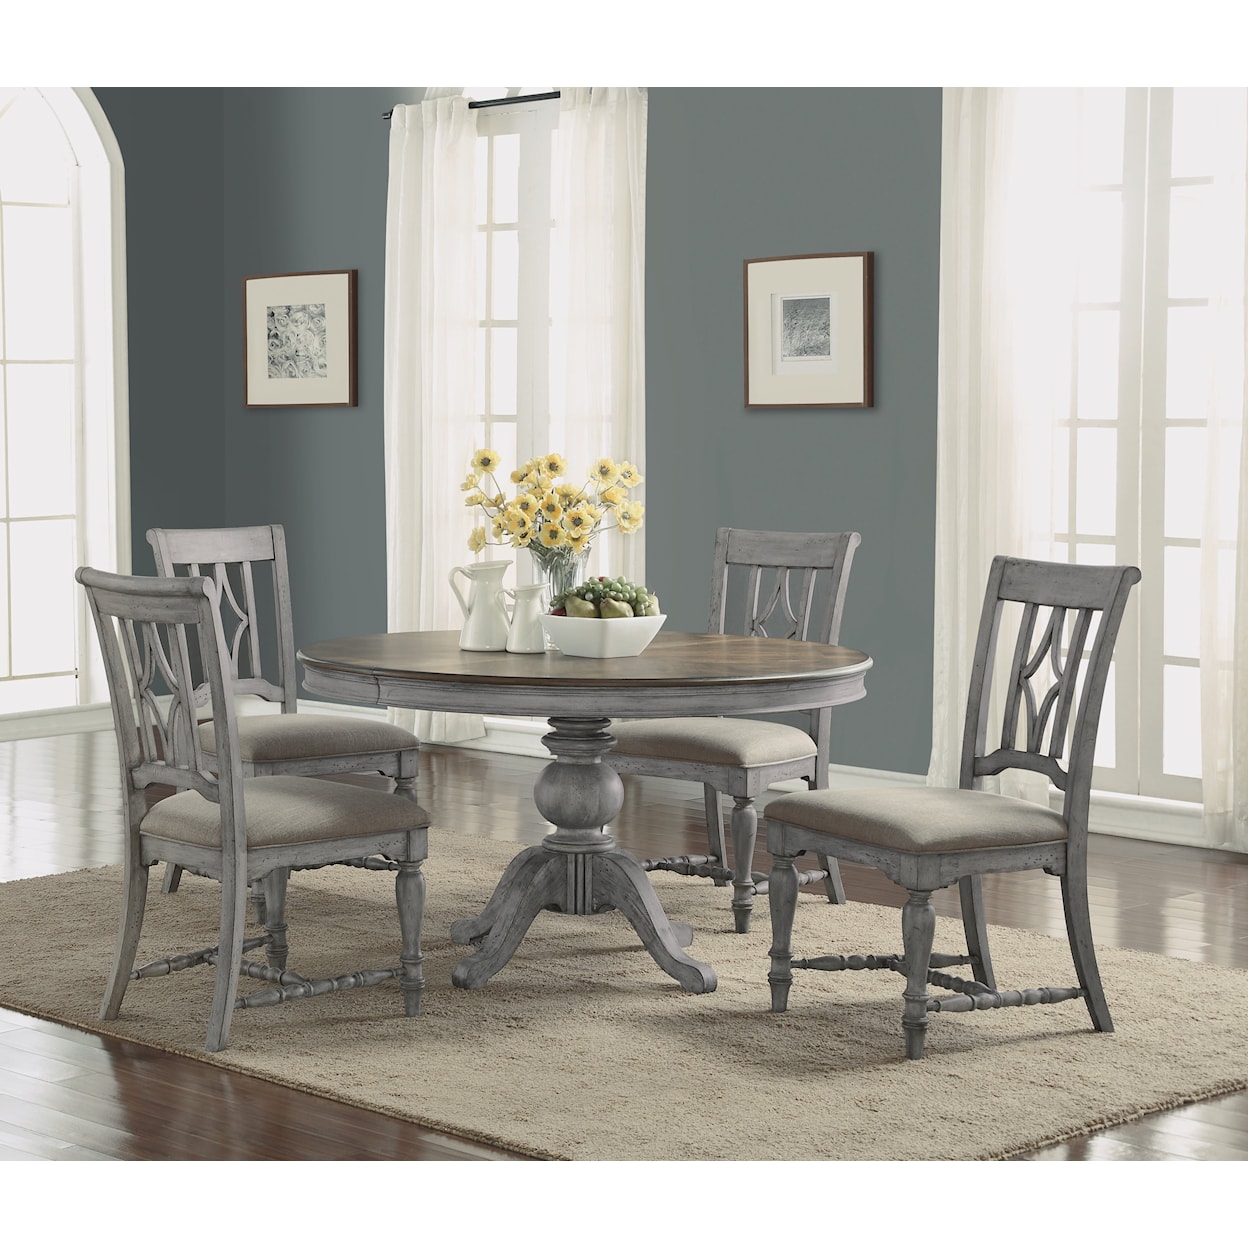 Flexsteel Wynwood Collection Plymouth 5 Piece Dining Set